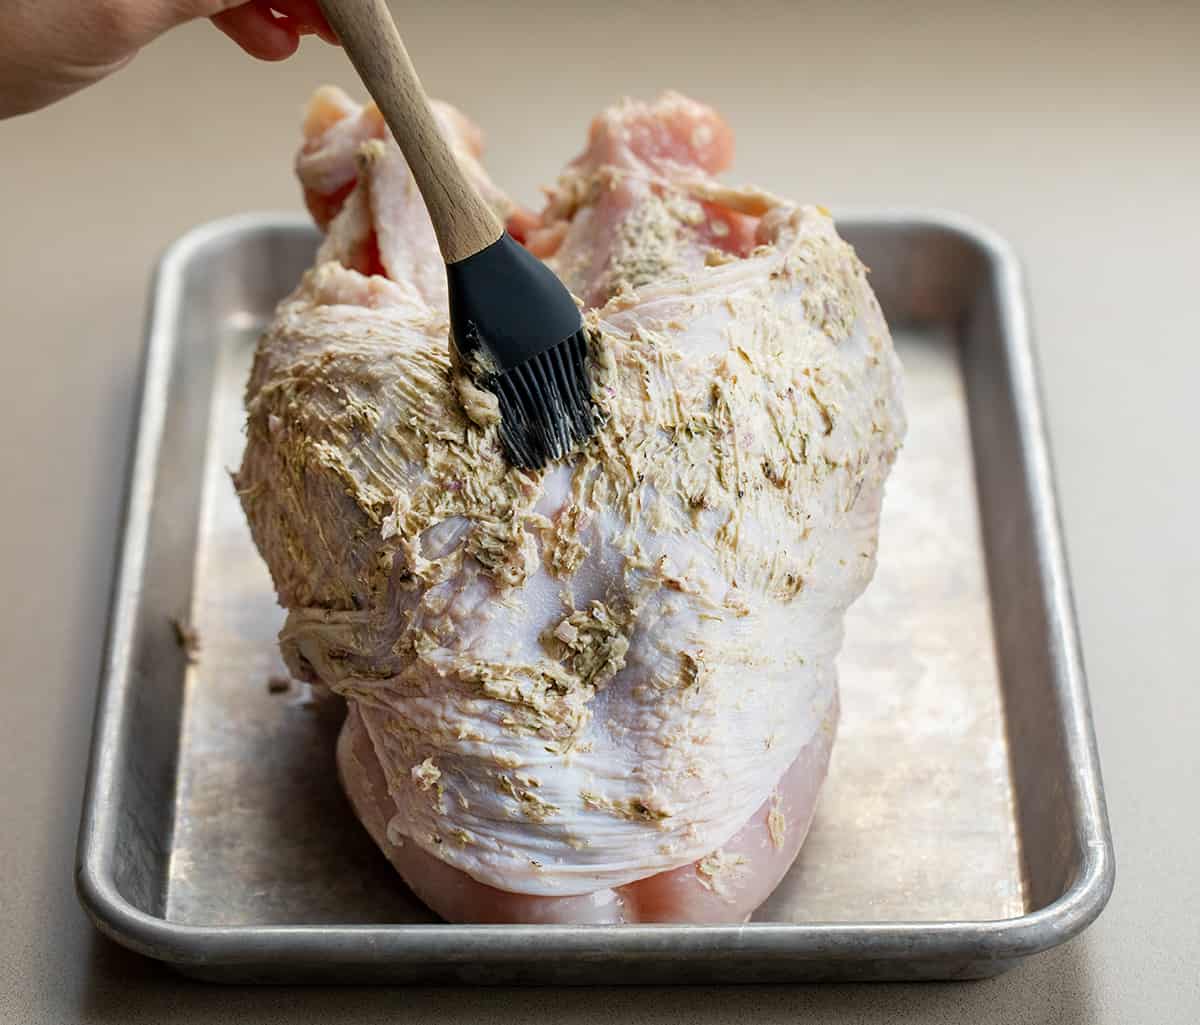 Adding butter and herbs to a raw turkey breast.